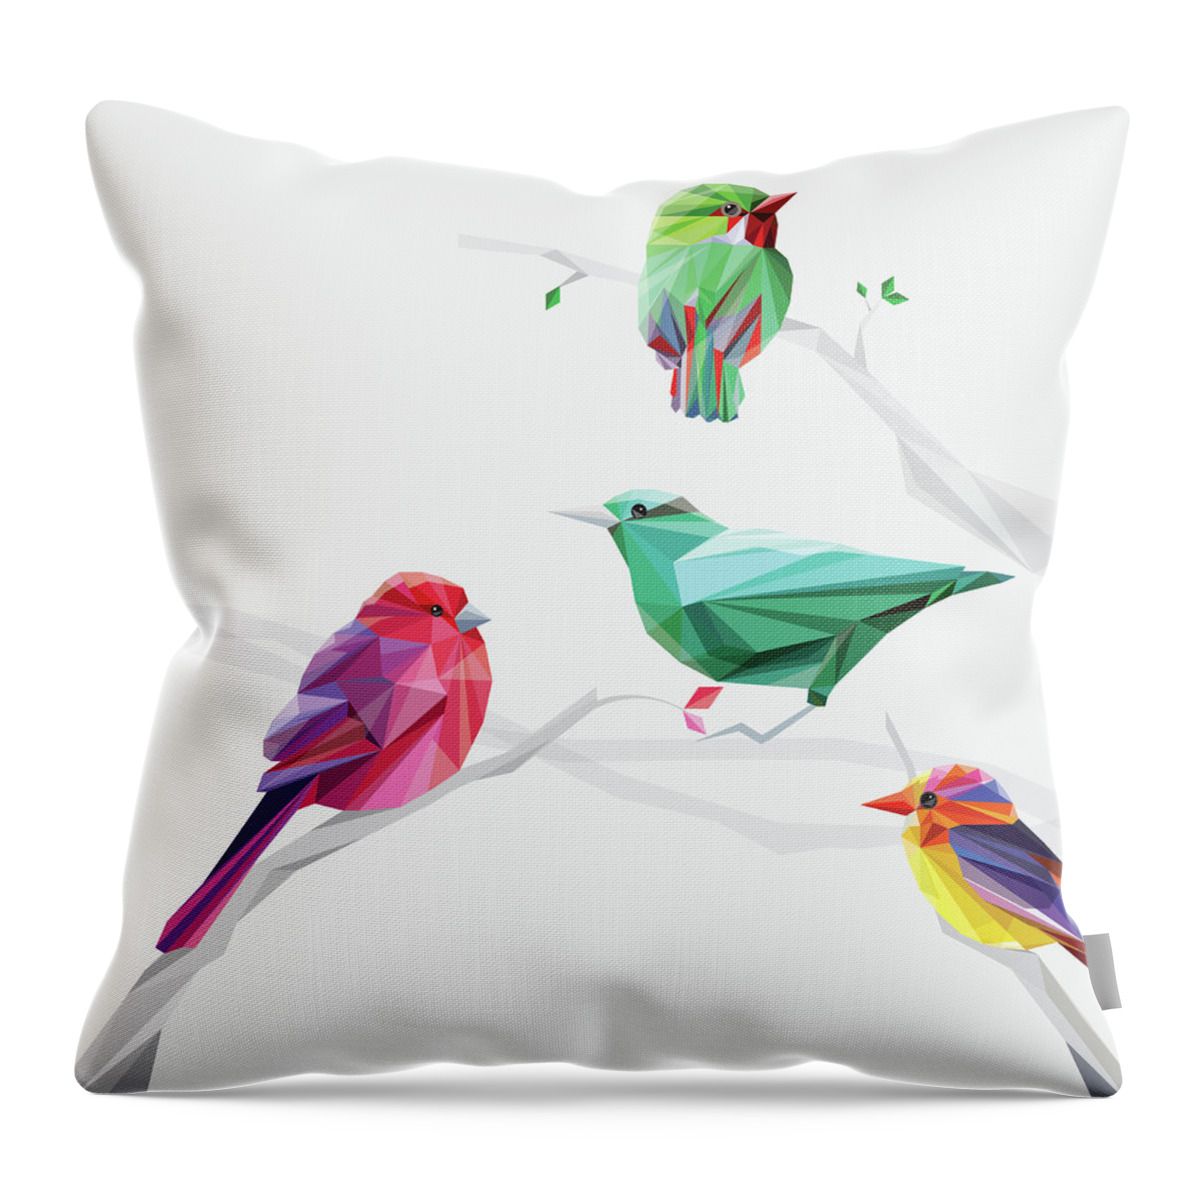 Funky Throw Pillow featuring the digital art Set Of Abstract Geometric Colorful Birds by Pika111